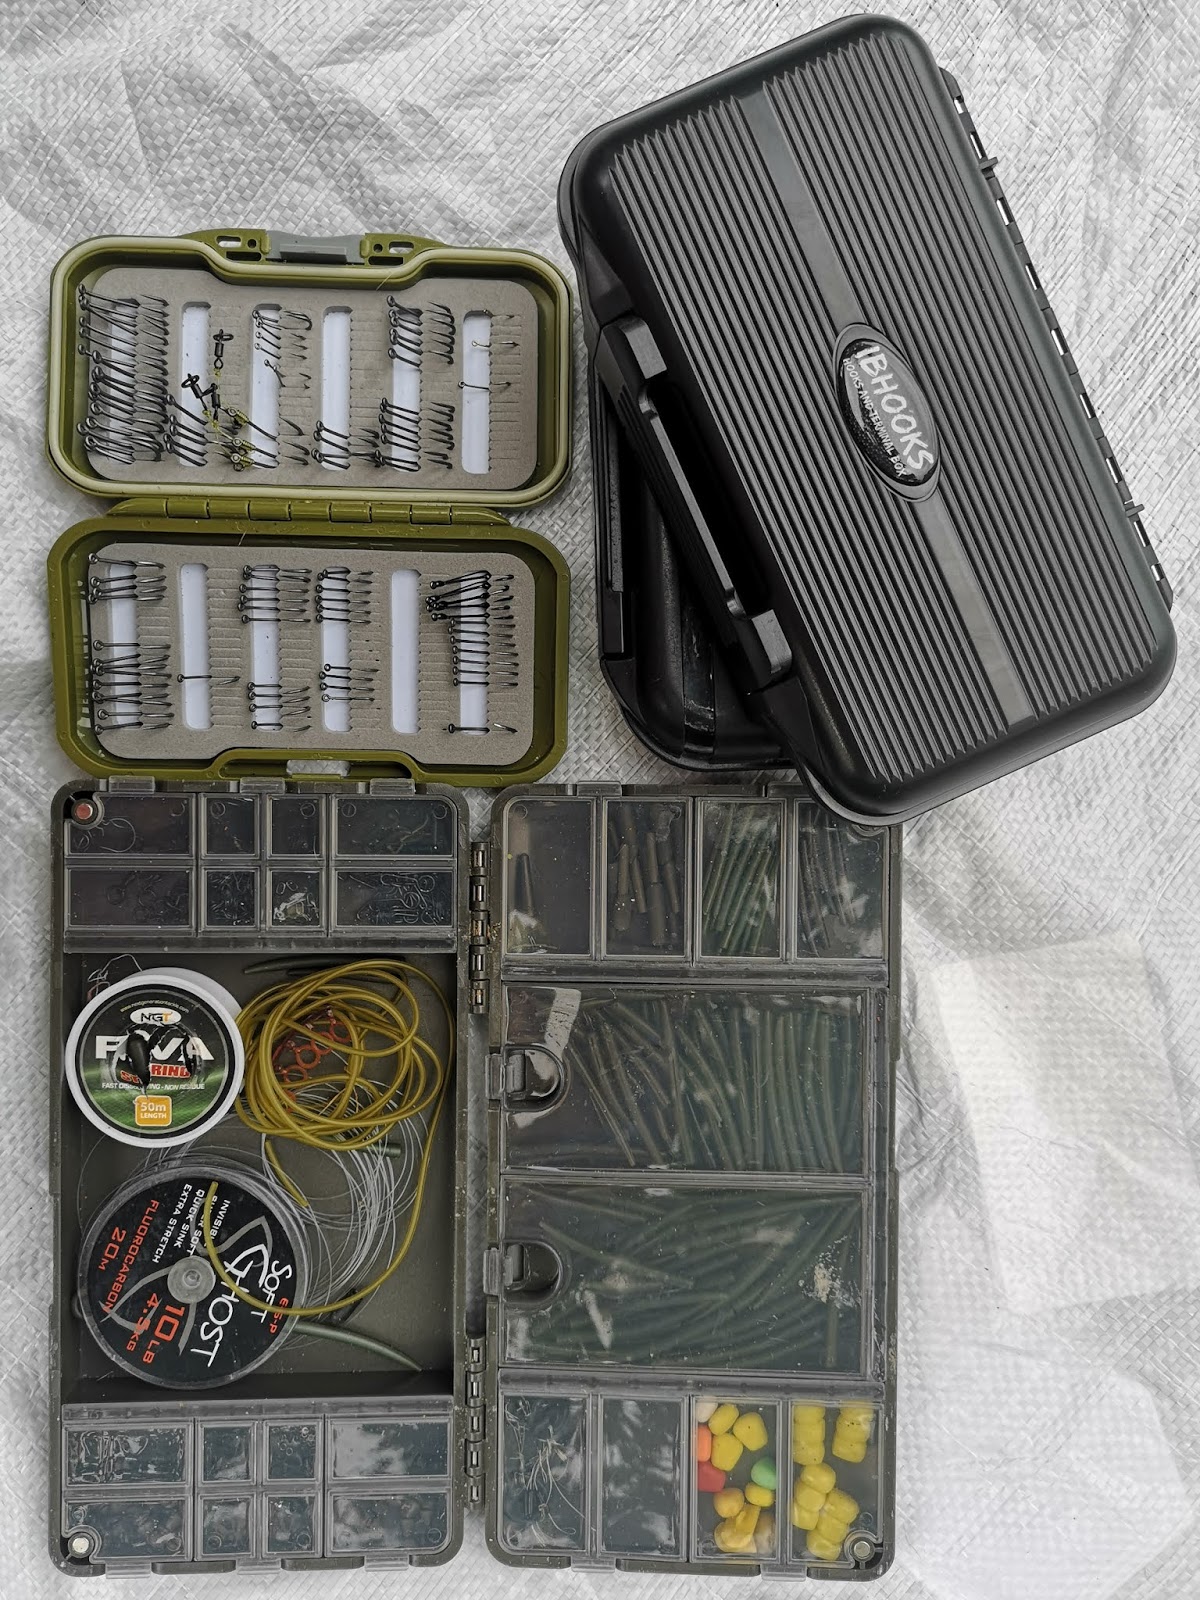 ANGLING WITH SHAUN: IBHOOKS fishing terminal tackle, hook and accessory  boxes REVIEW